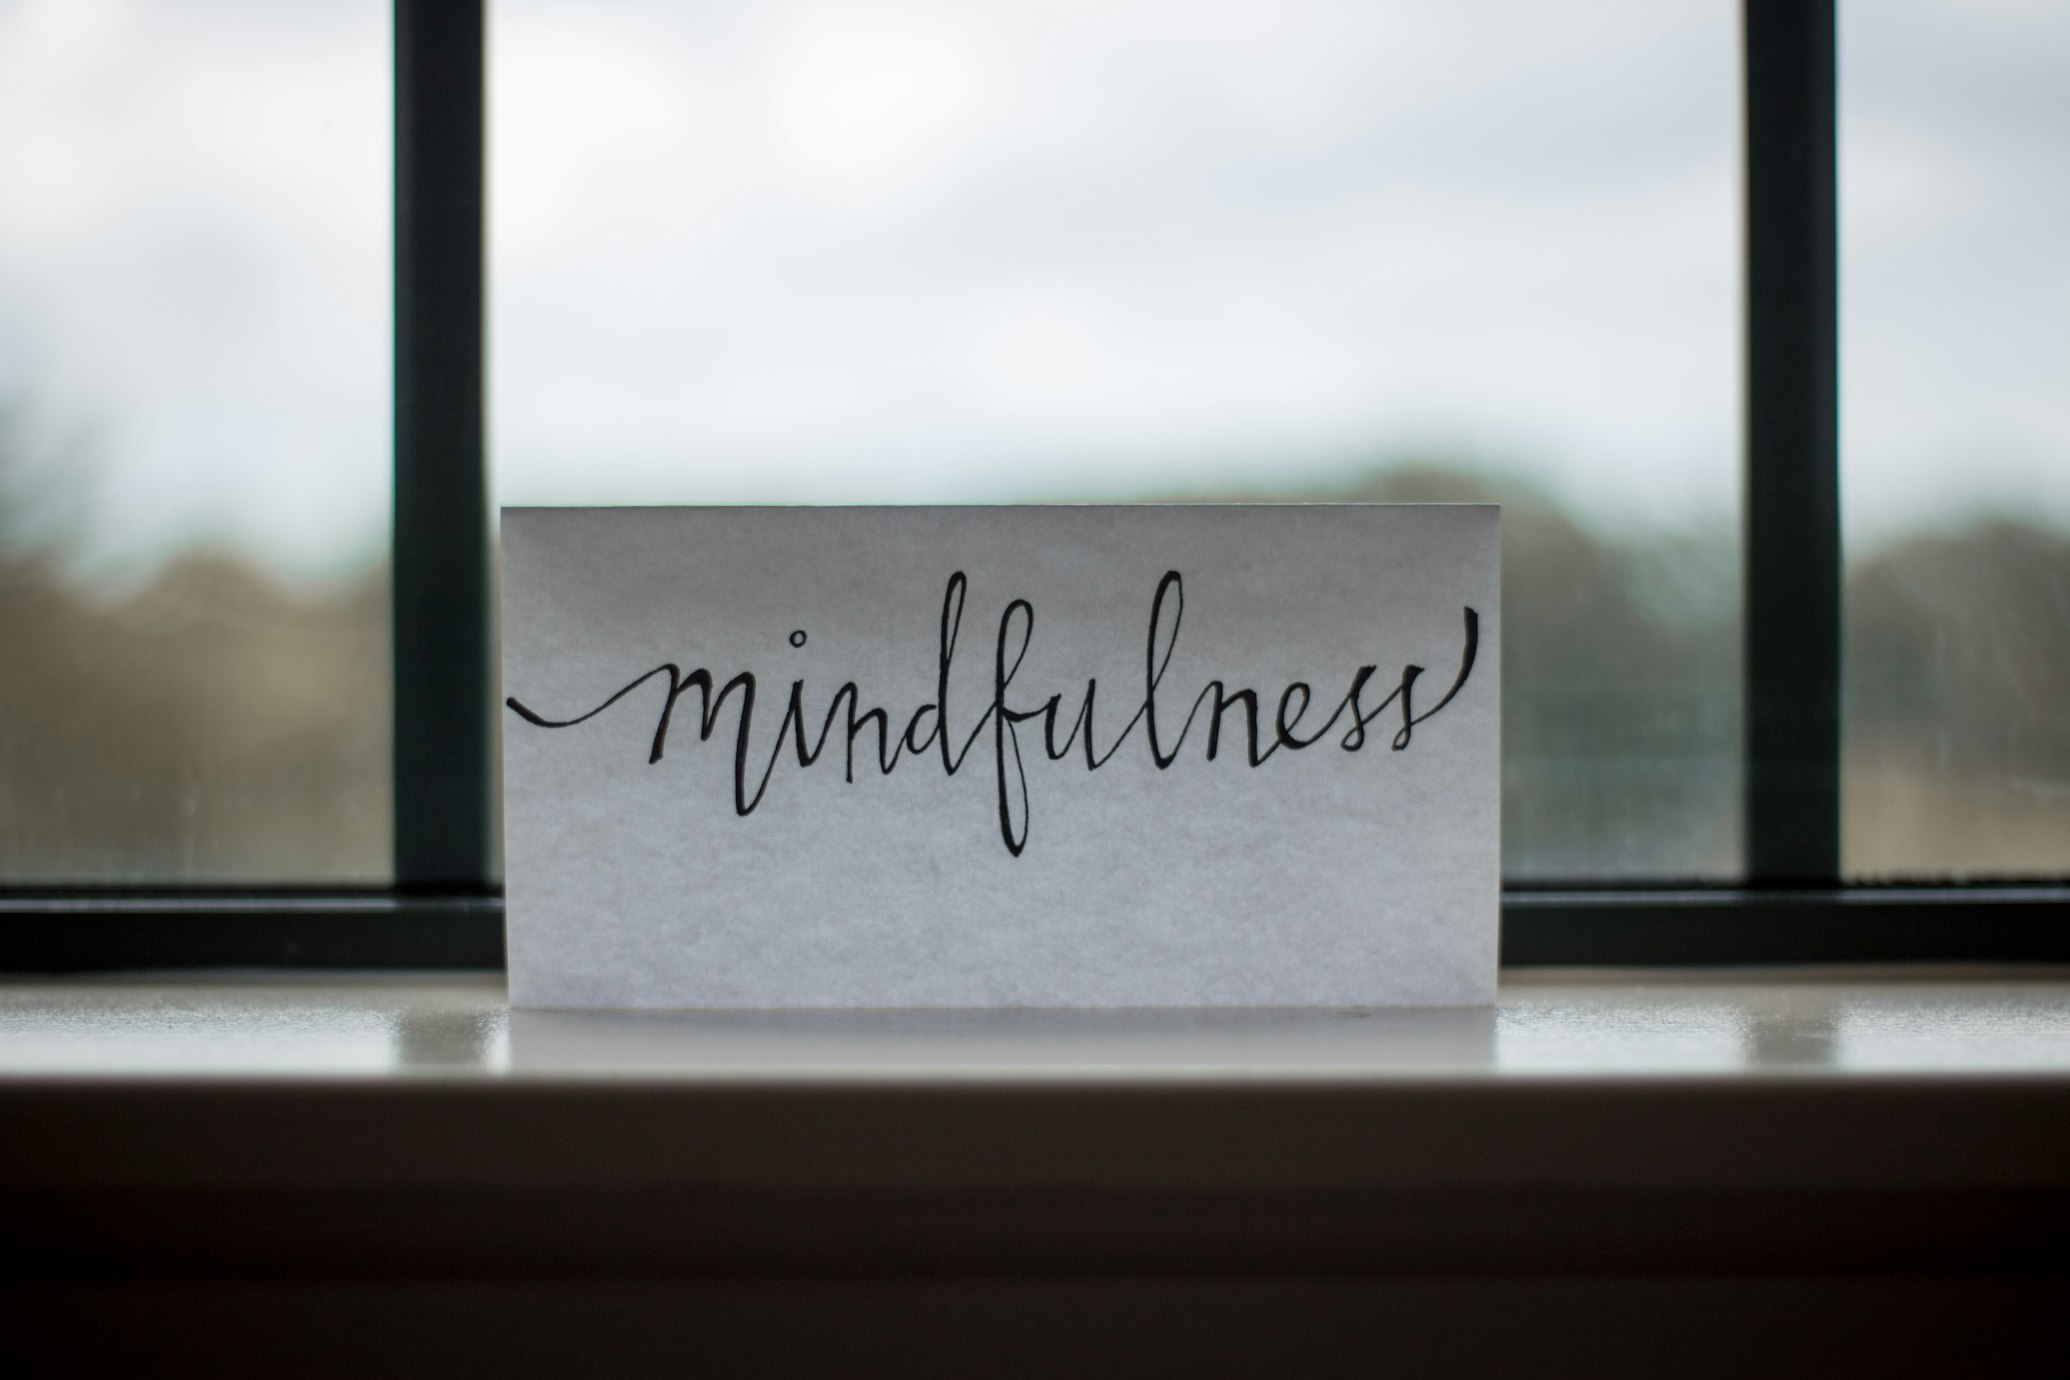 Cultivating mindfulness